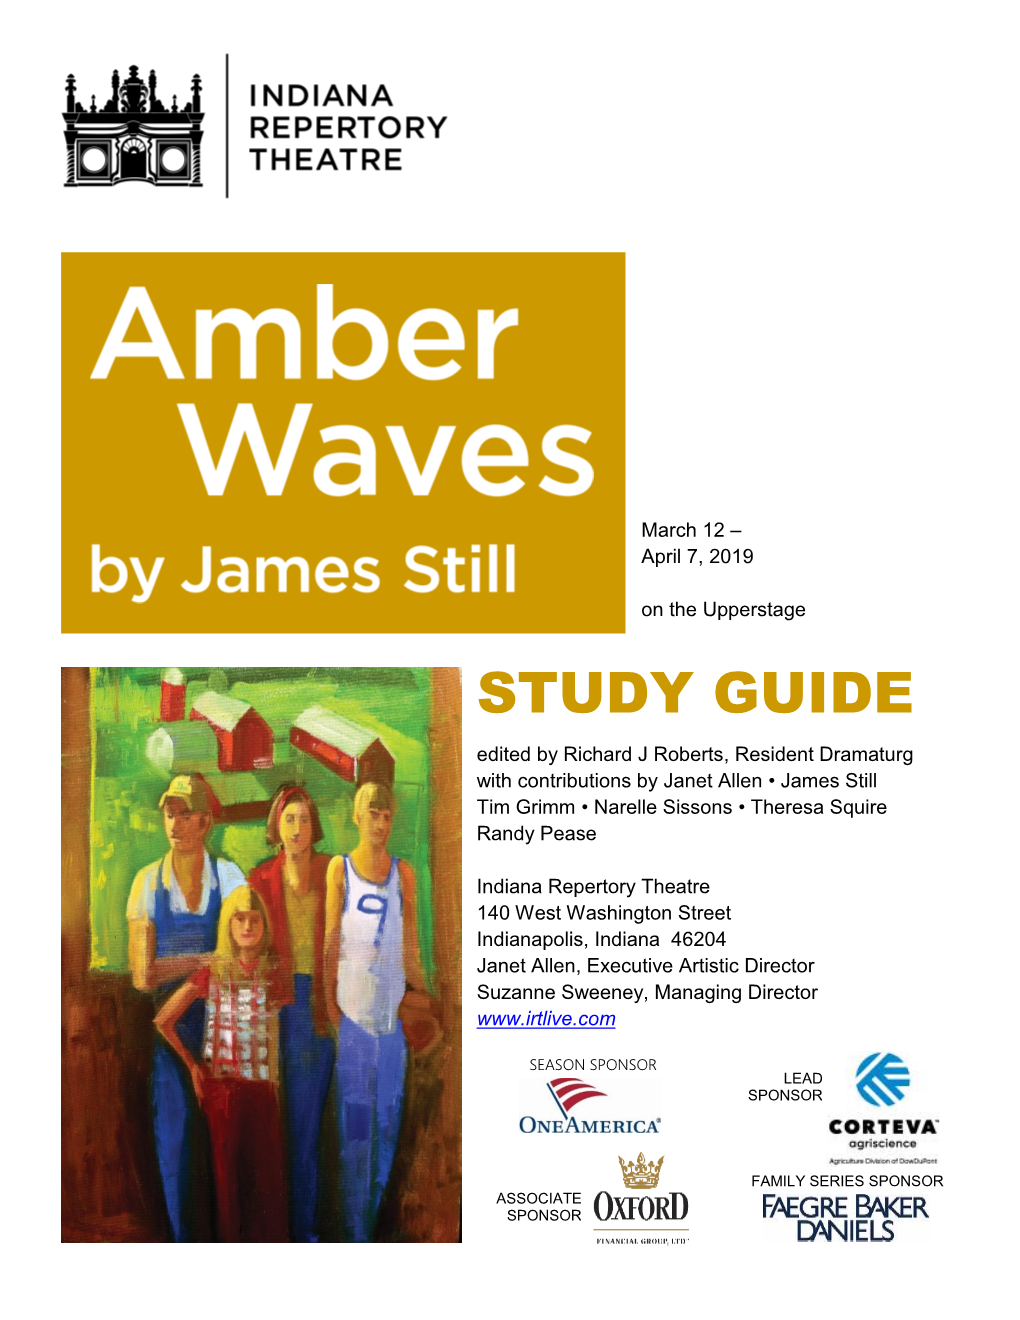 AMBER WAVES by JAMES STILL Hard Times Mean Hard Decisions As an Indiana Family Faces the Prospect of Losing Their Farm